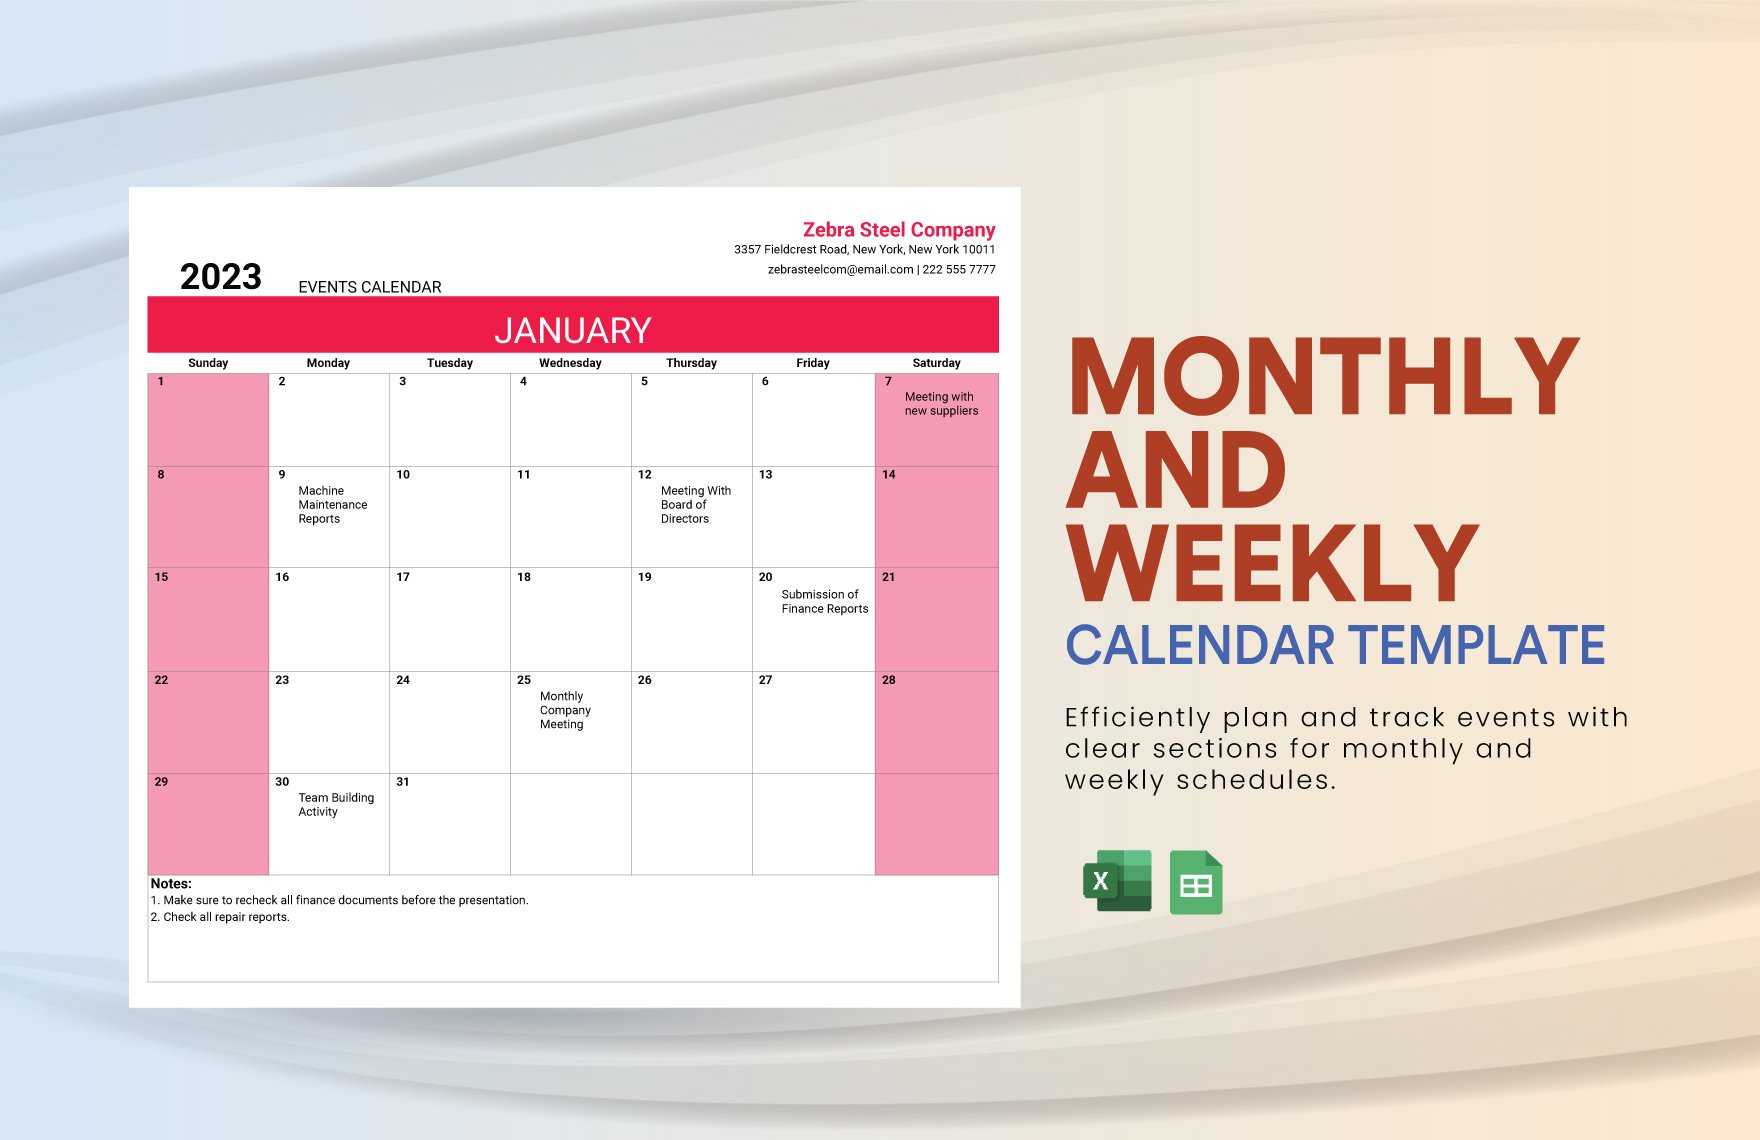 Monthly and Weekly Calendar